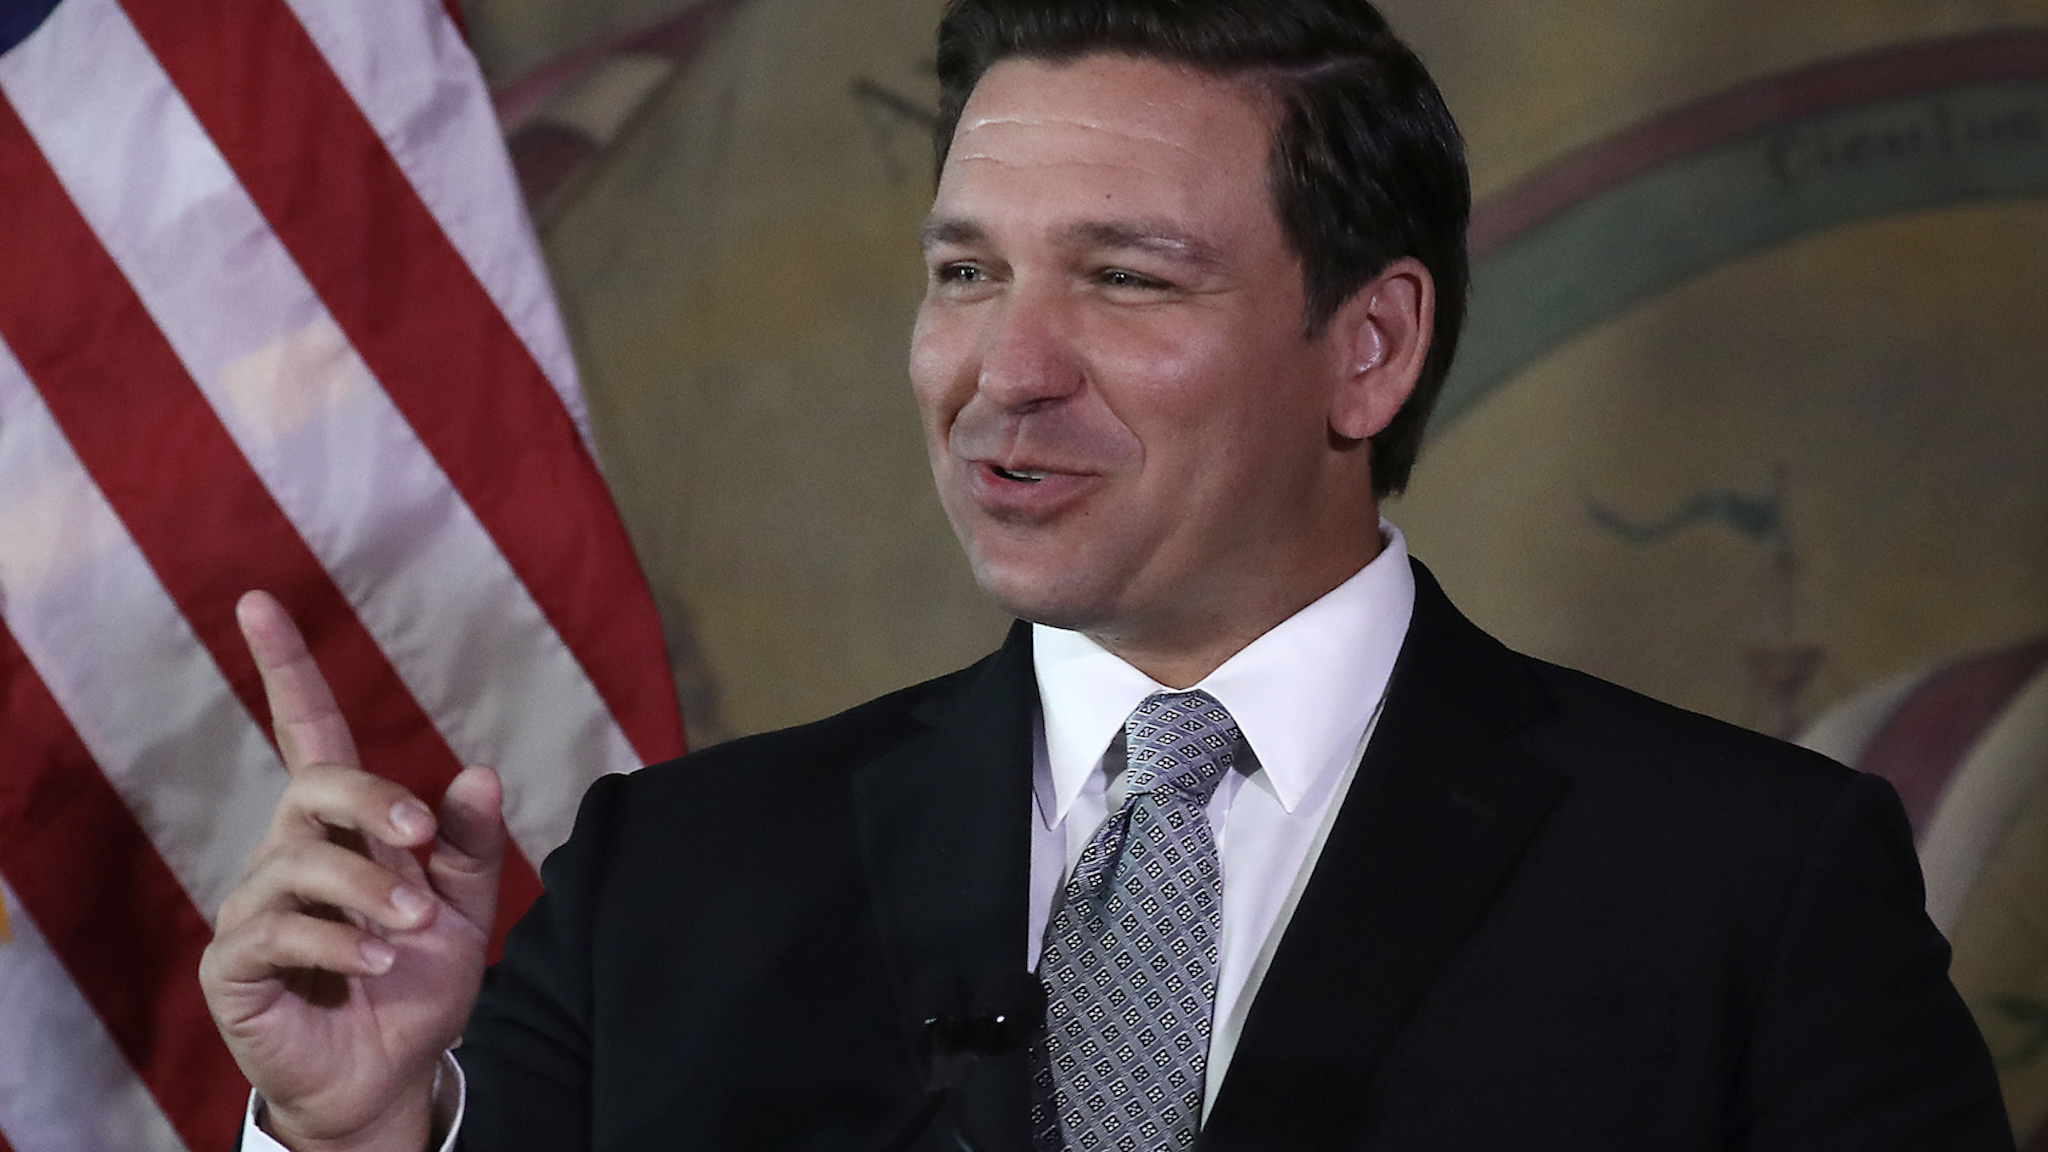 Newly sworn-in Gov. Ron DeSantis attends an event at the Freedom Tower where he named Barbara Lagoa to the Florida Supreme Court on January 09, 2019 in Miami, Florida.